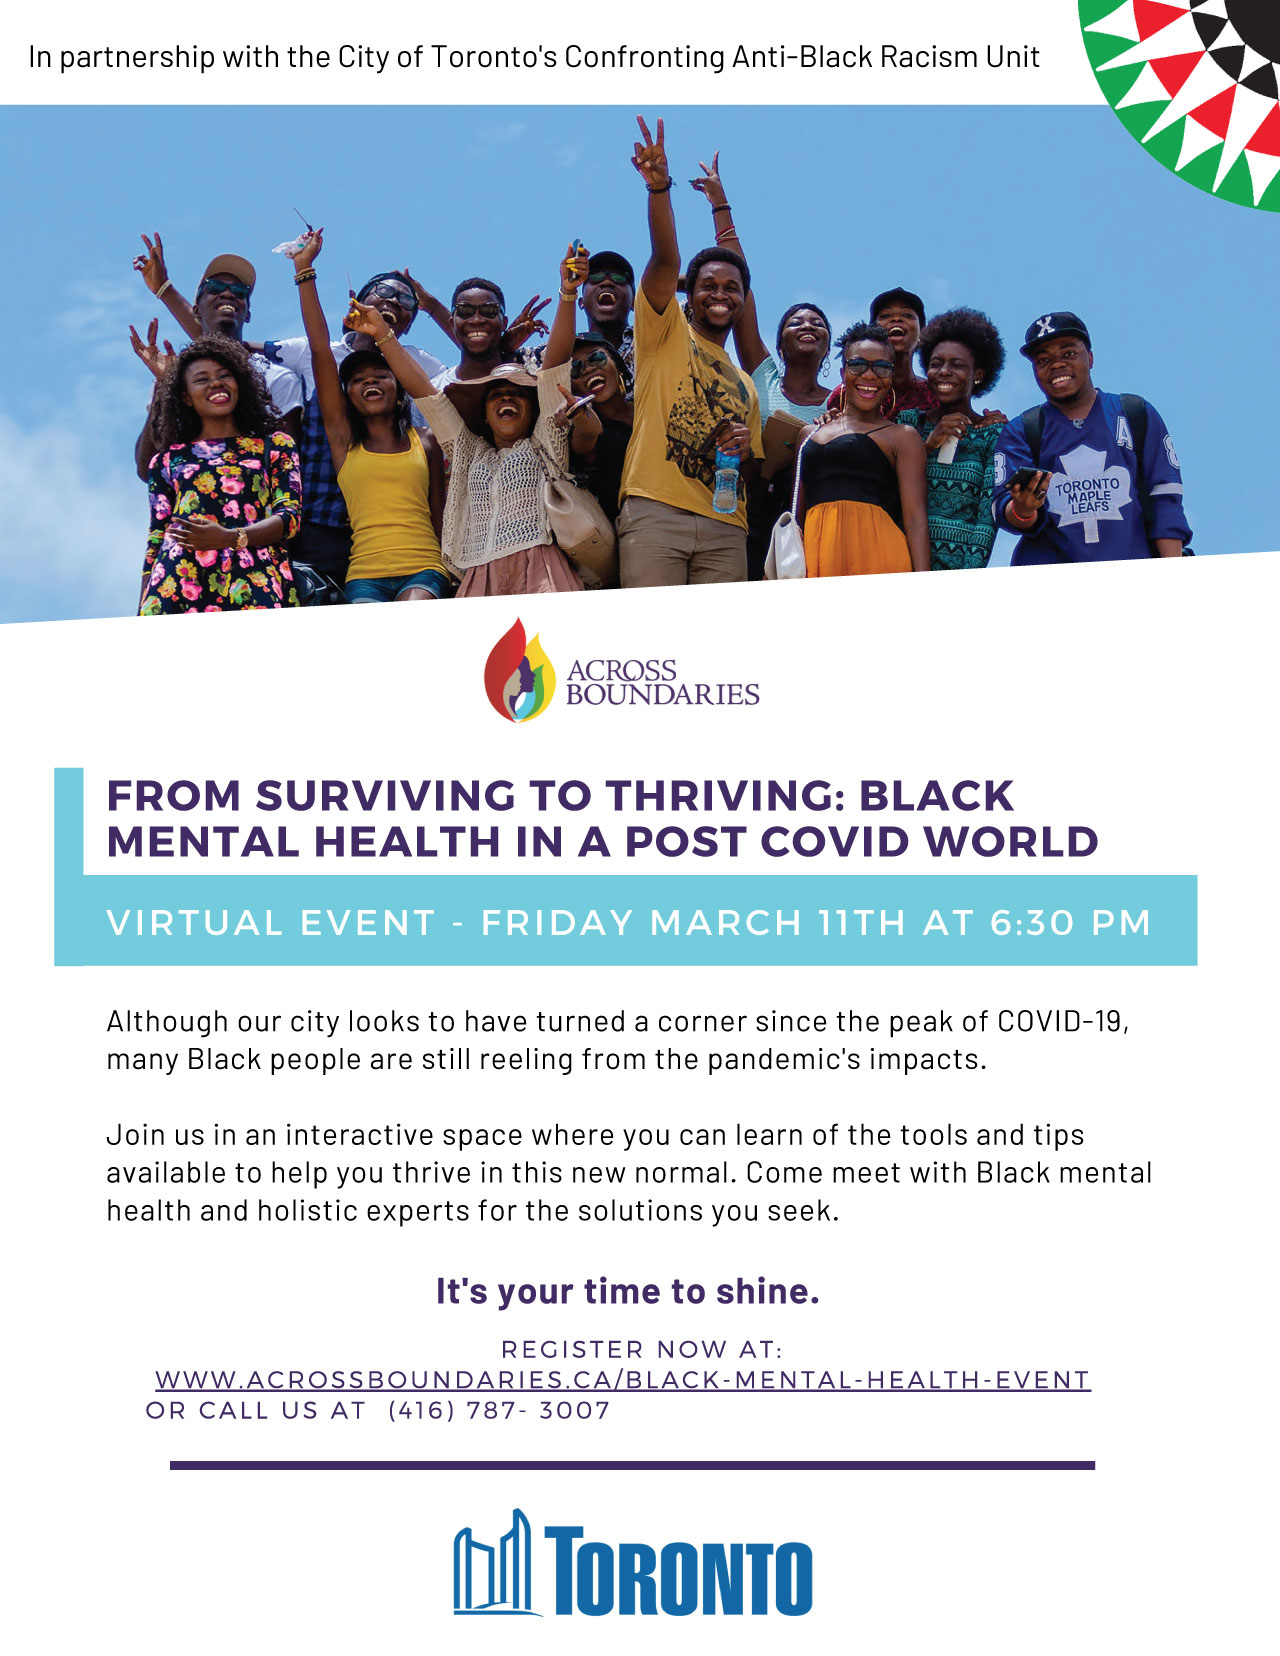 From Surviving to Thriving Black Mental Health in a Post COVID World